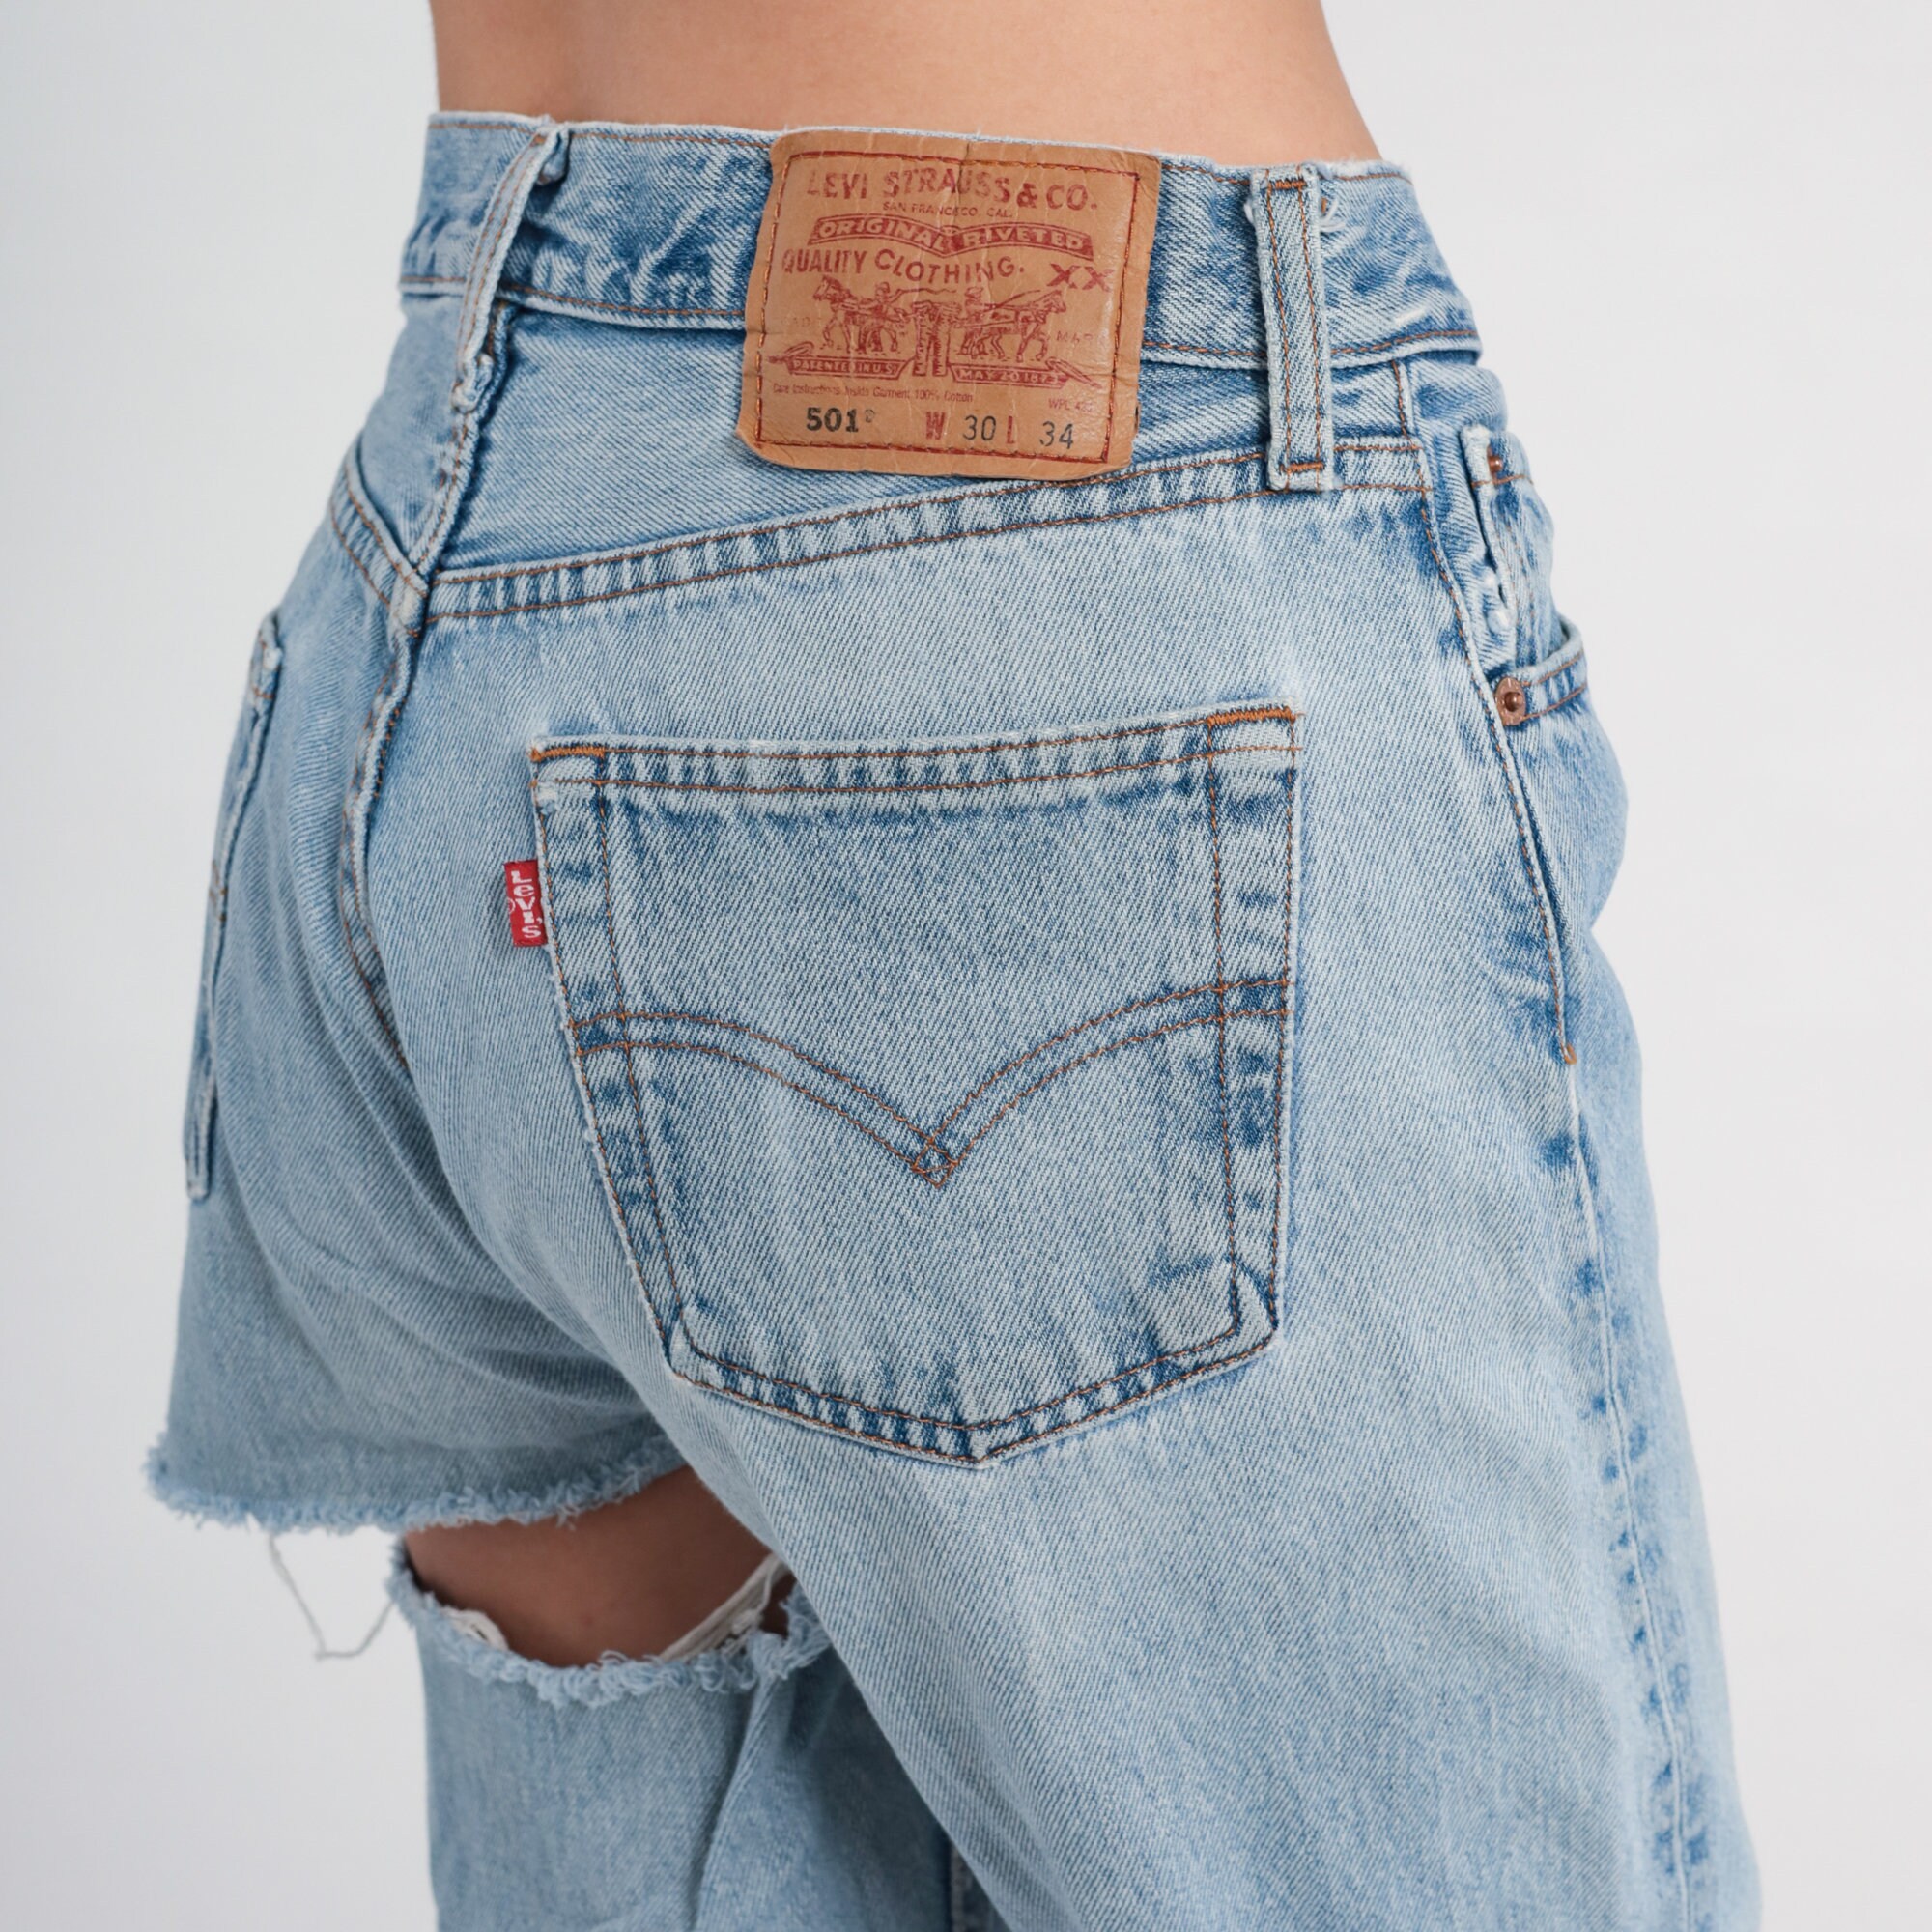 Ripped Levis Jeans Y2K Levi 501 Butt Rip Mid Rise Waist Jeans - Etsy Sweden